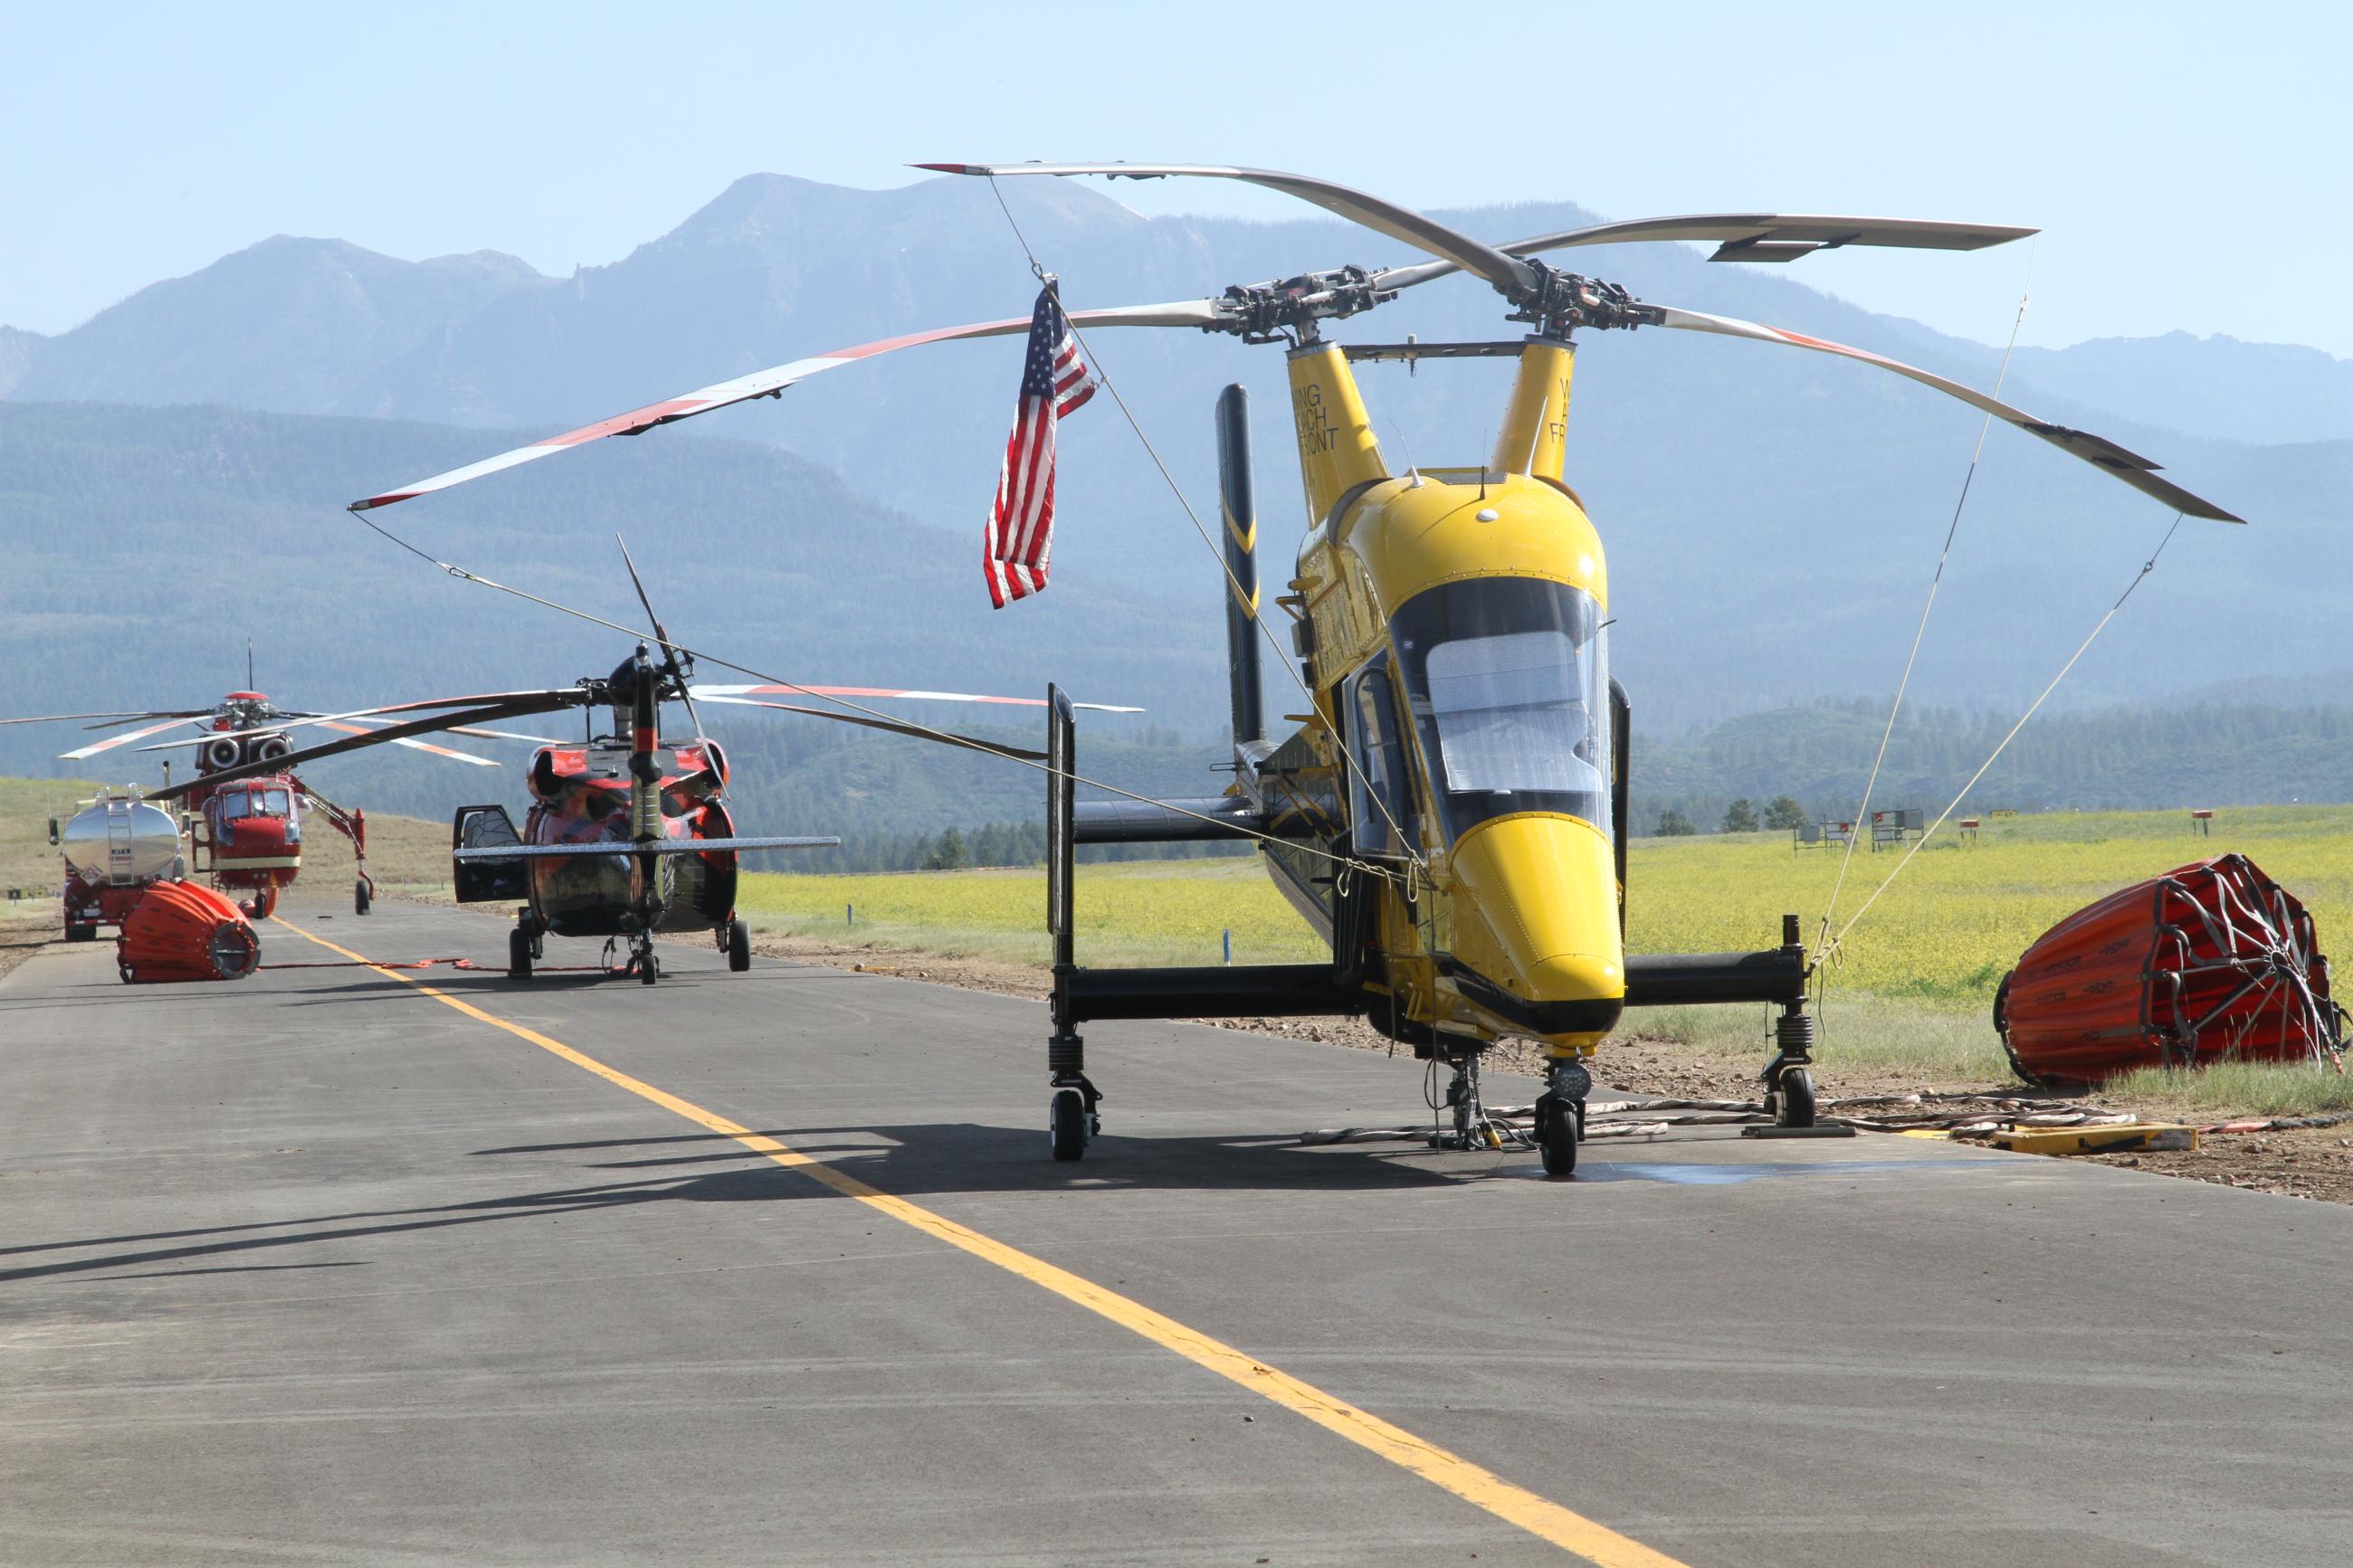 Yellow helicopter sits in front of two red helicopters on a runway.The Rocky Mountains are behind all three helicopters